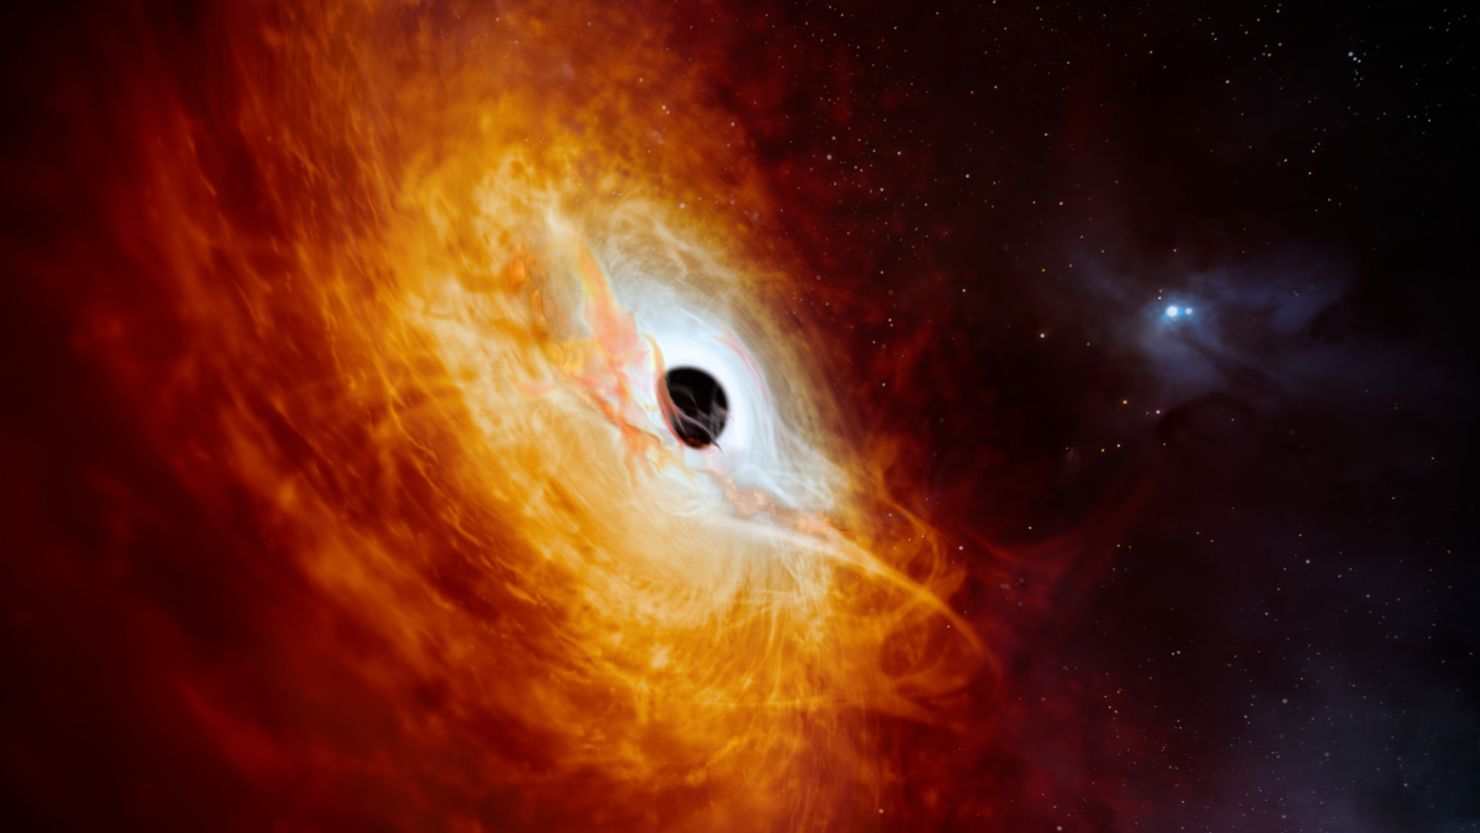 An artist's impression depicts a quasar that has been discovered to be the brightest object in the universe, and it's powered by the fastest-growing black hole ever observed.